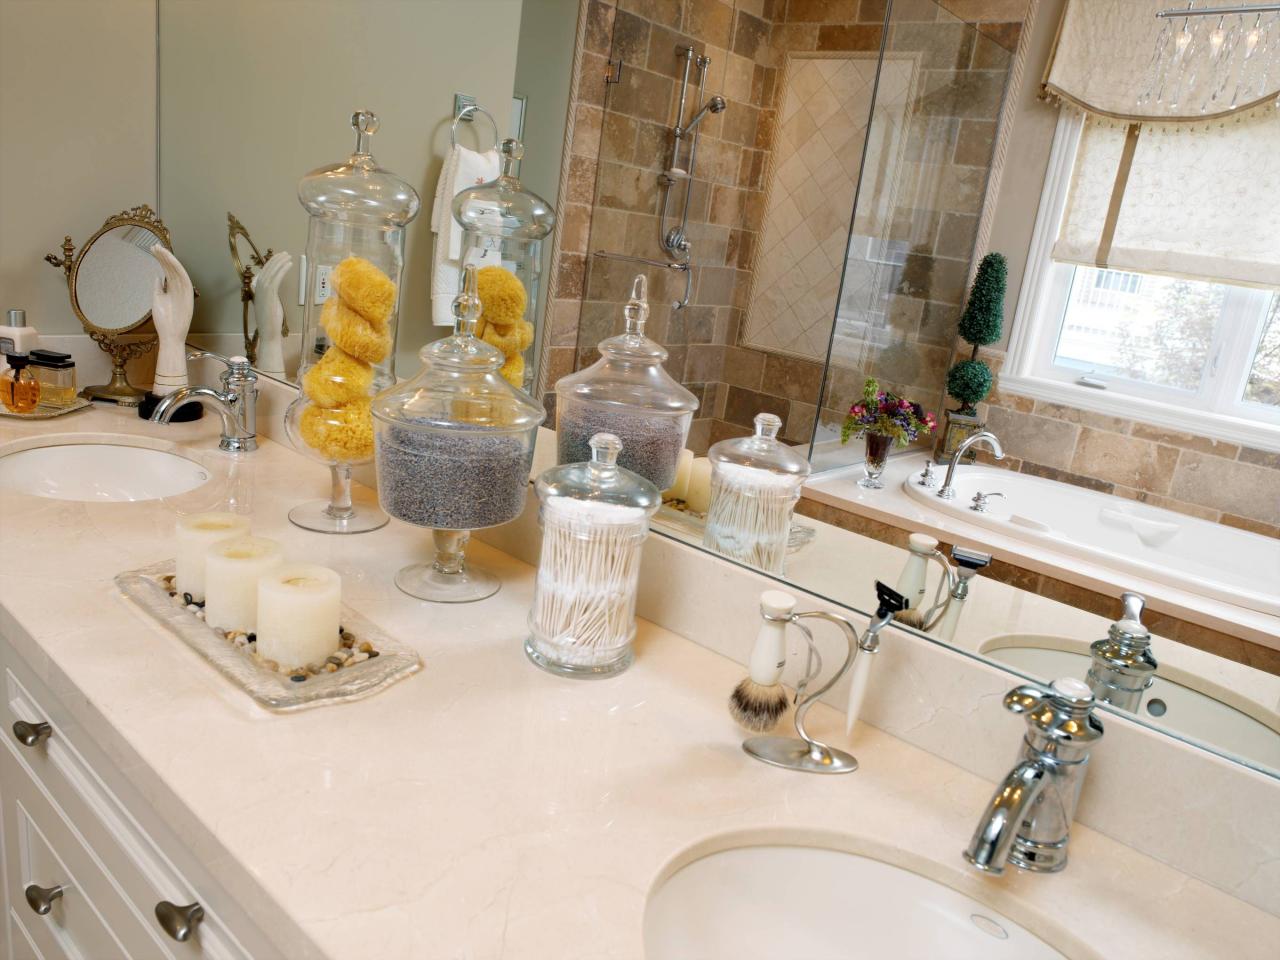 Decorating with Apothecary Jars Bathroom sink decor, Apothecary